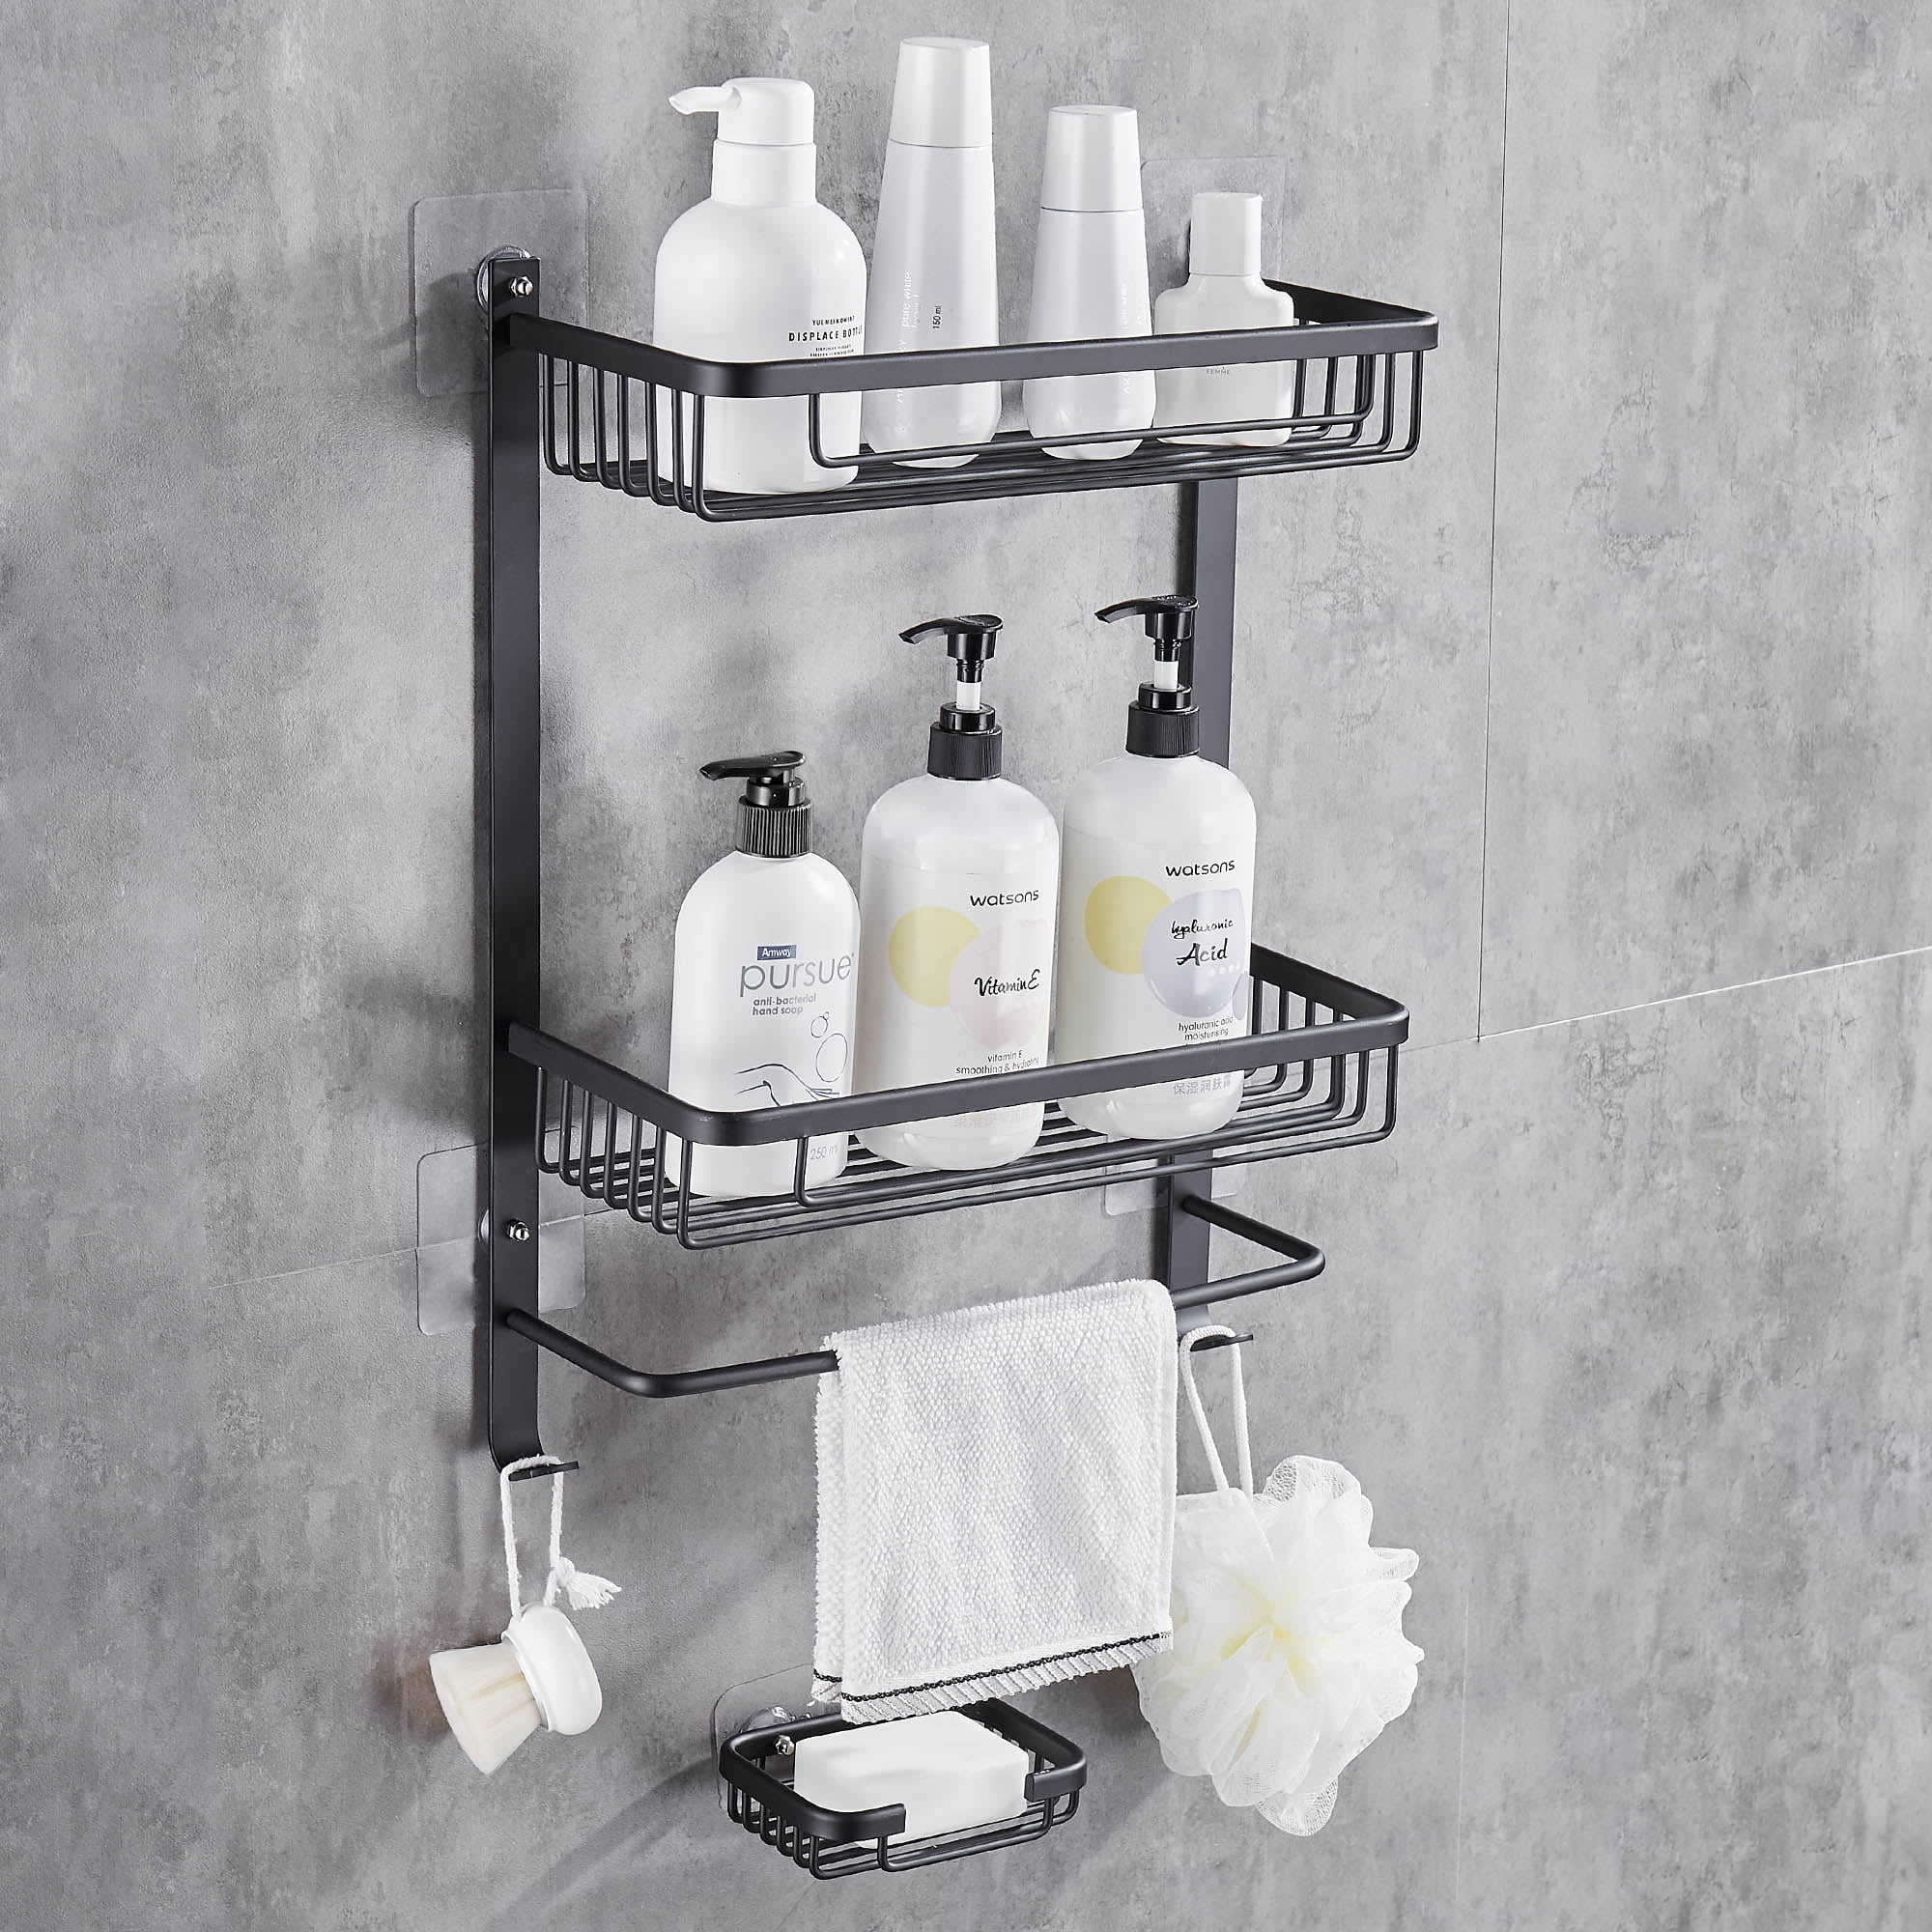 Posyla Shower Caddy, Bathroom Shower Organizers, Black Shower Shelves for  Inside Shower with Soap Caddy & Toothbrush Holder, Stainless Steel Wall  Rack